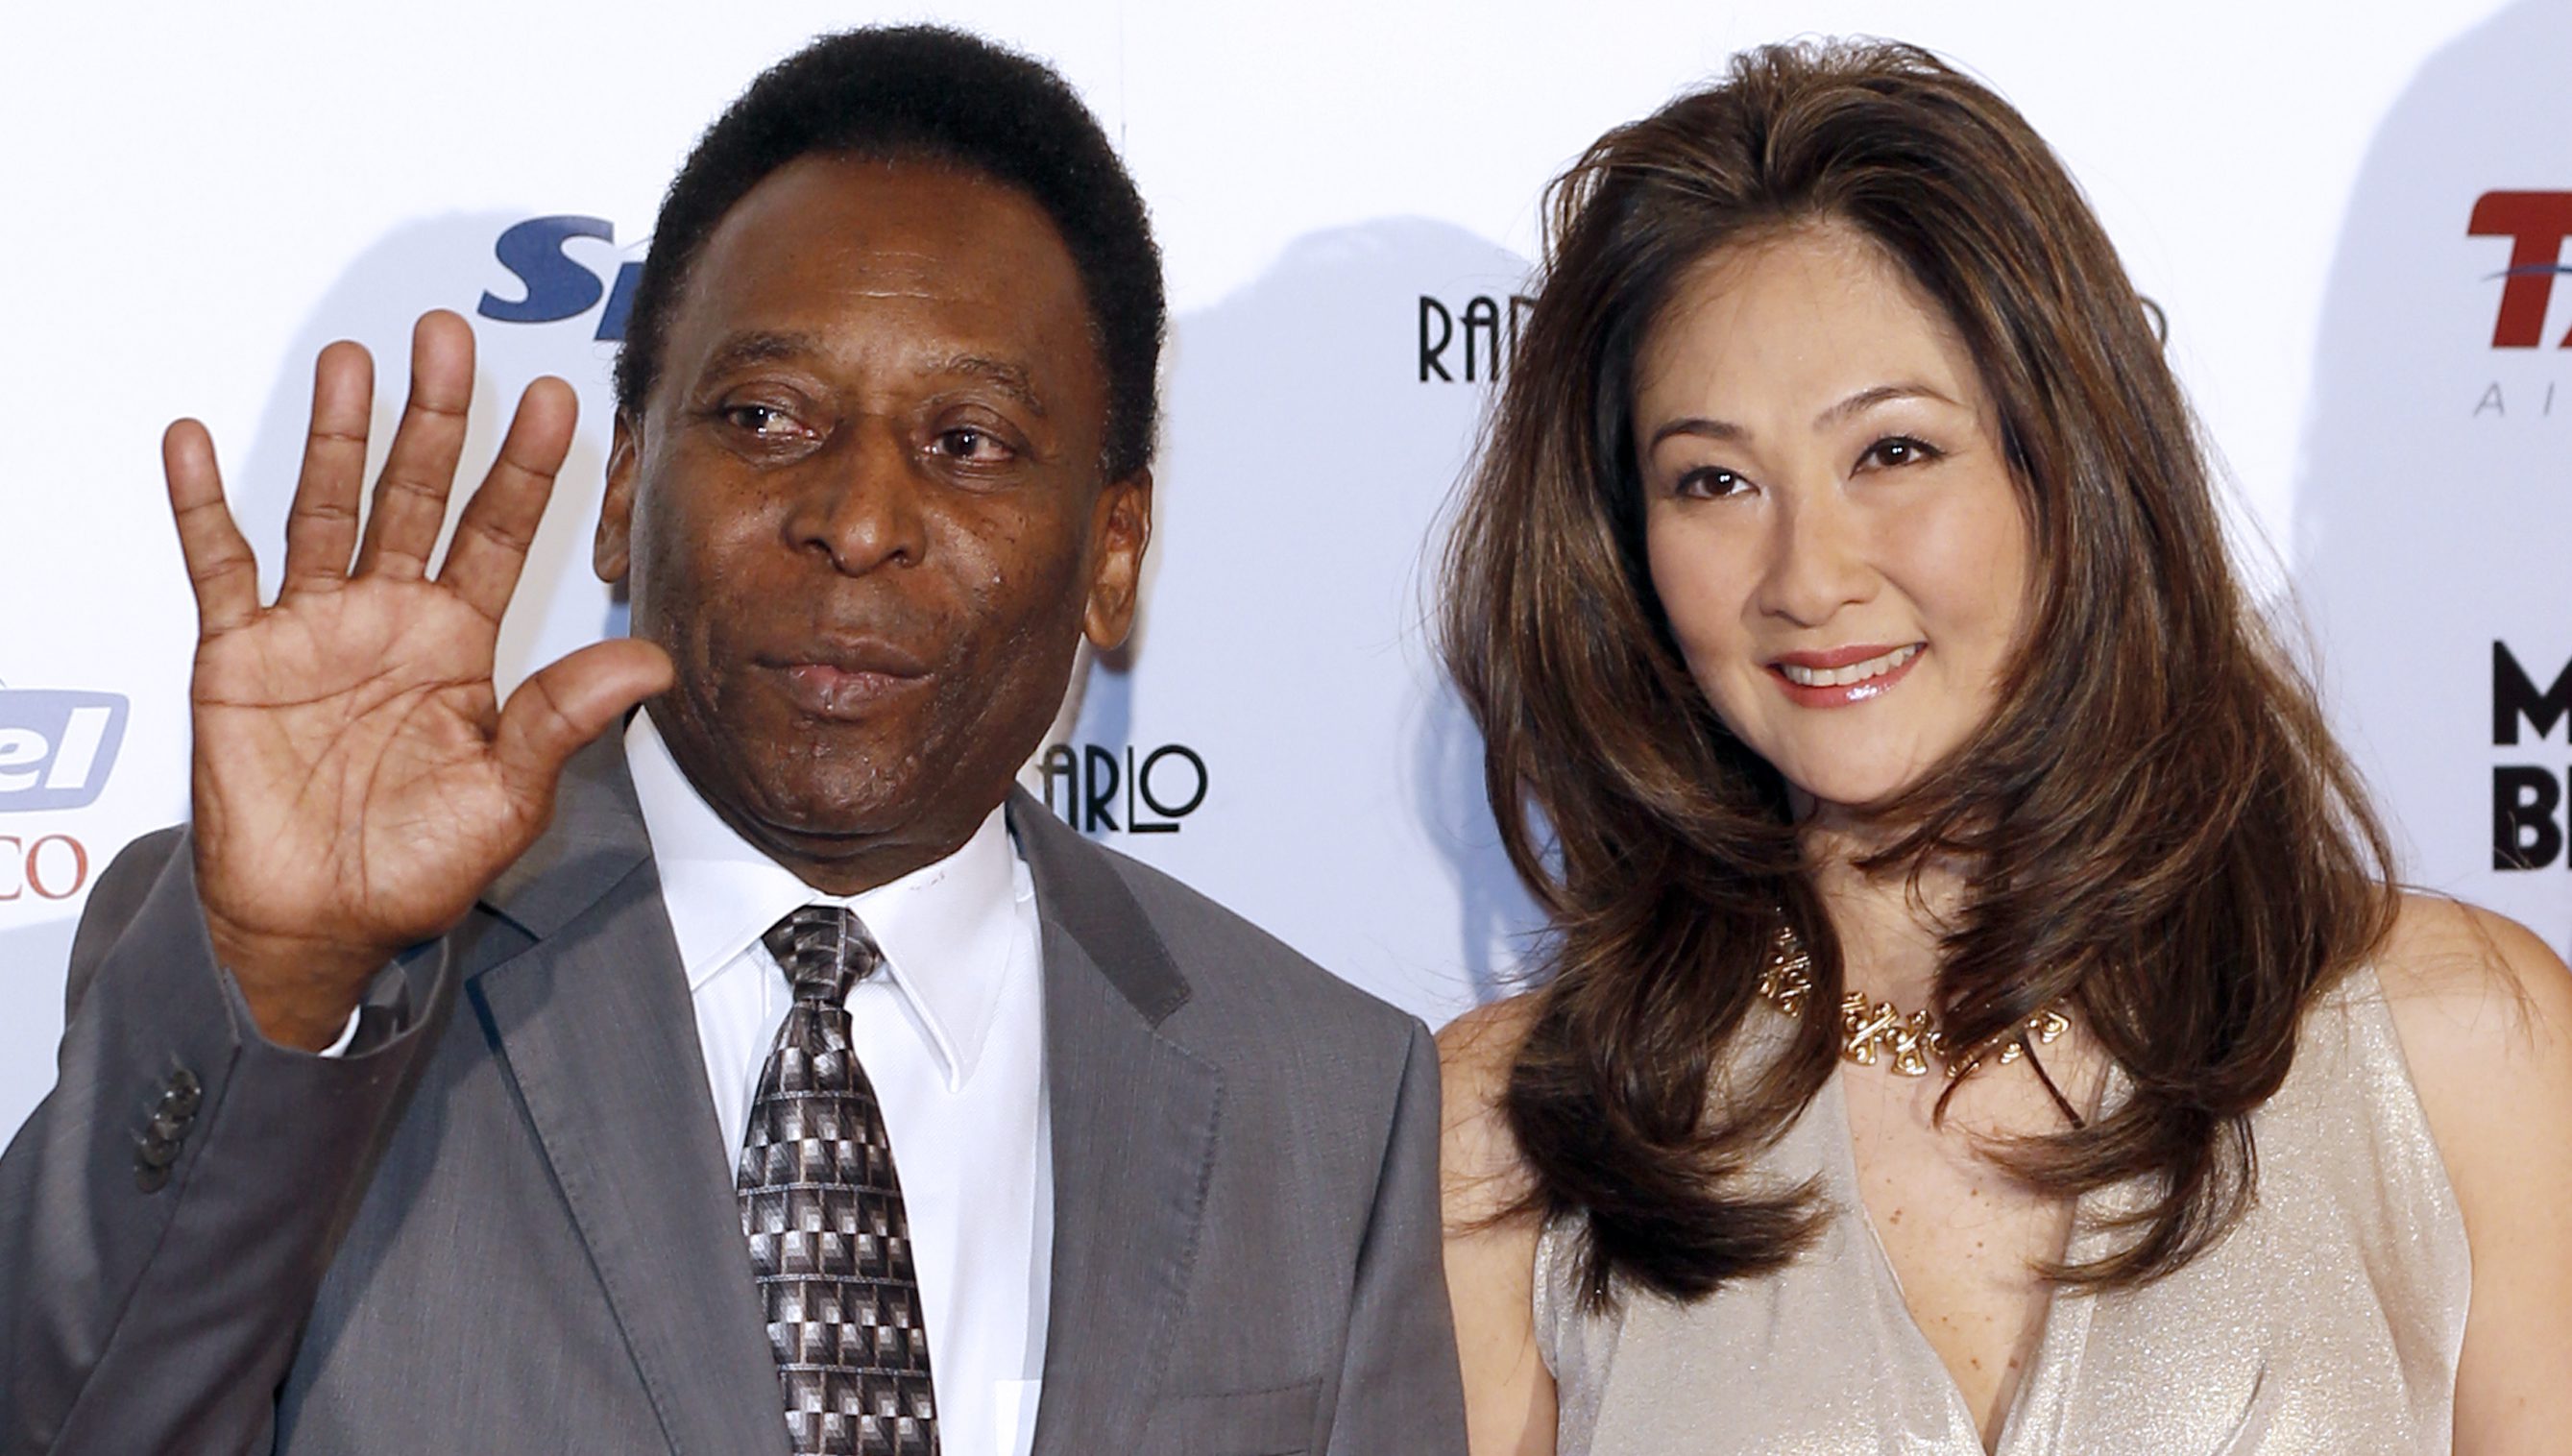 Did you know Brazil legend Pele married his third wife at age 75?